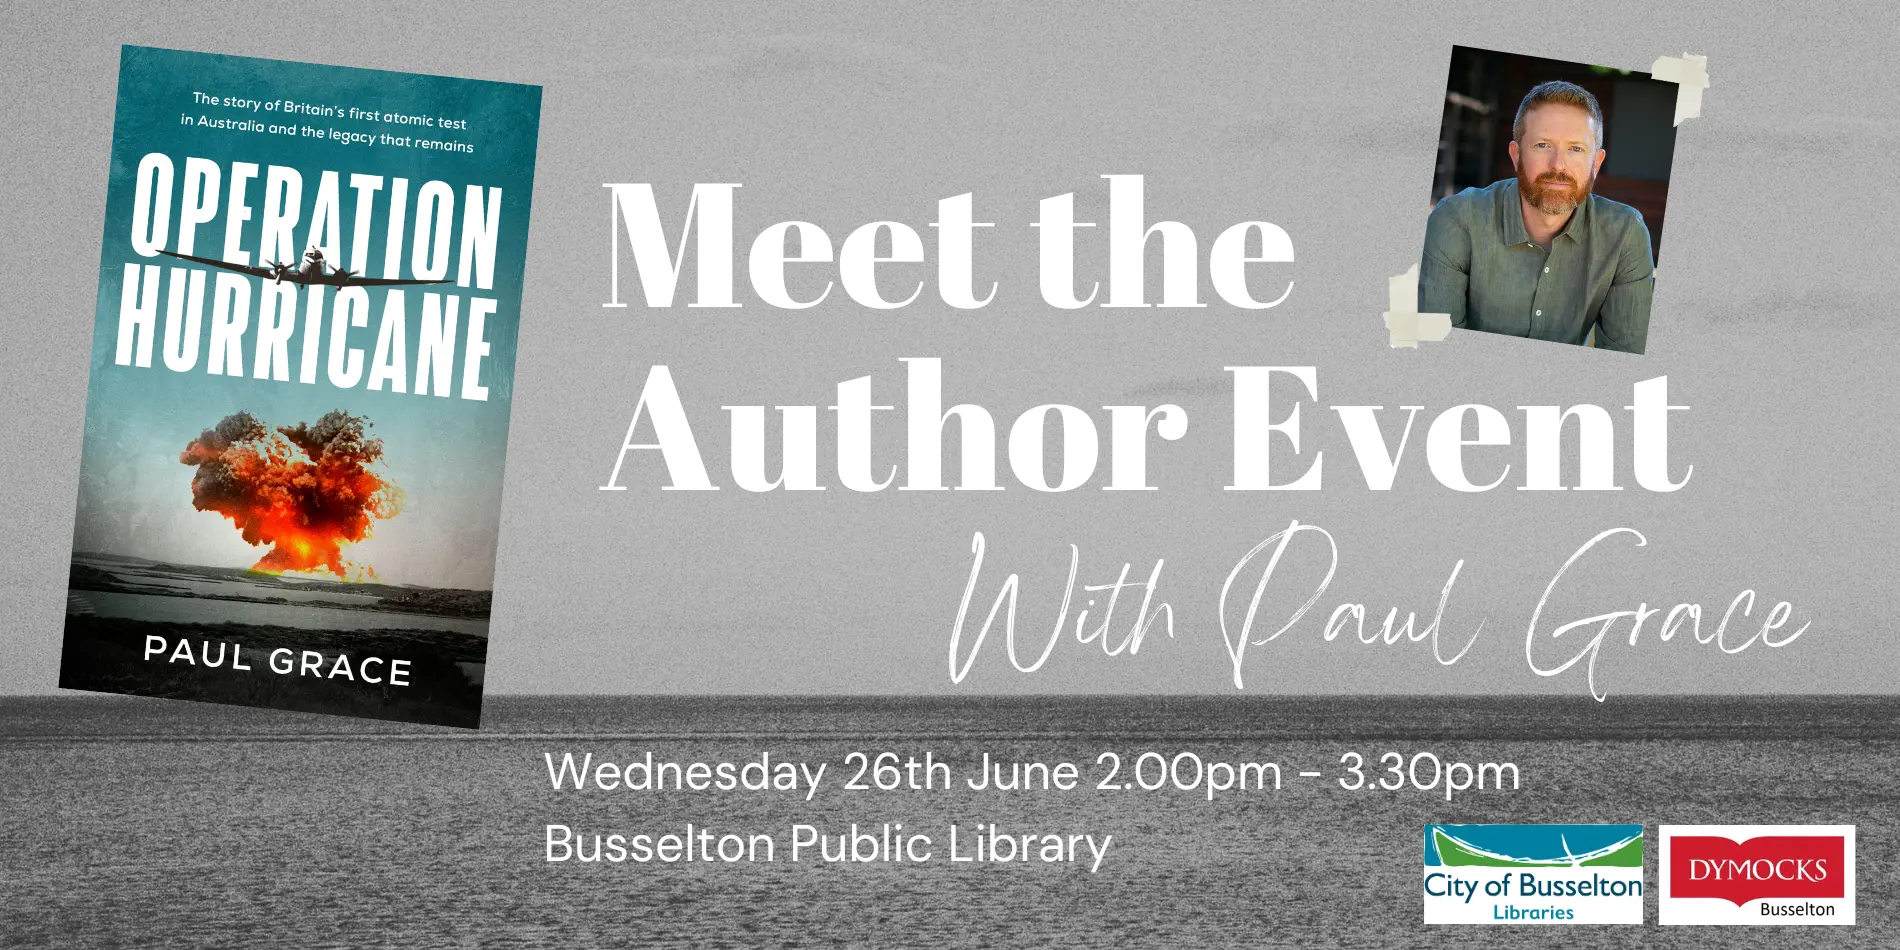 Meet author Paul Grace at Busselton Library on Wednesday 26th June, 2pm-3:30pm.